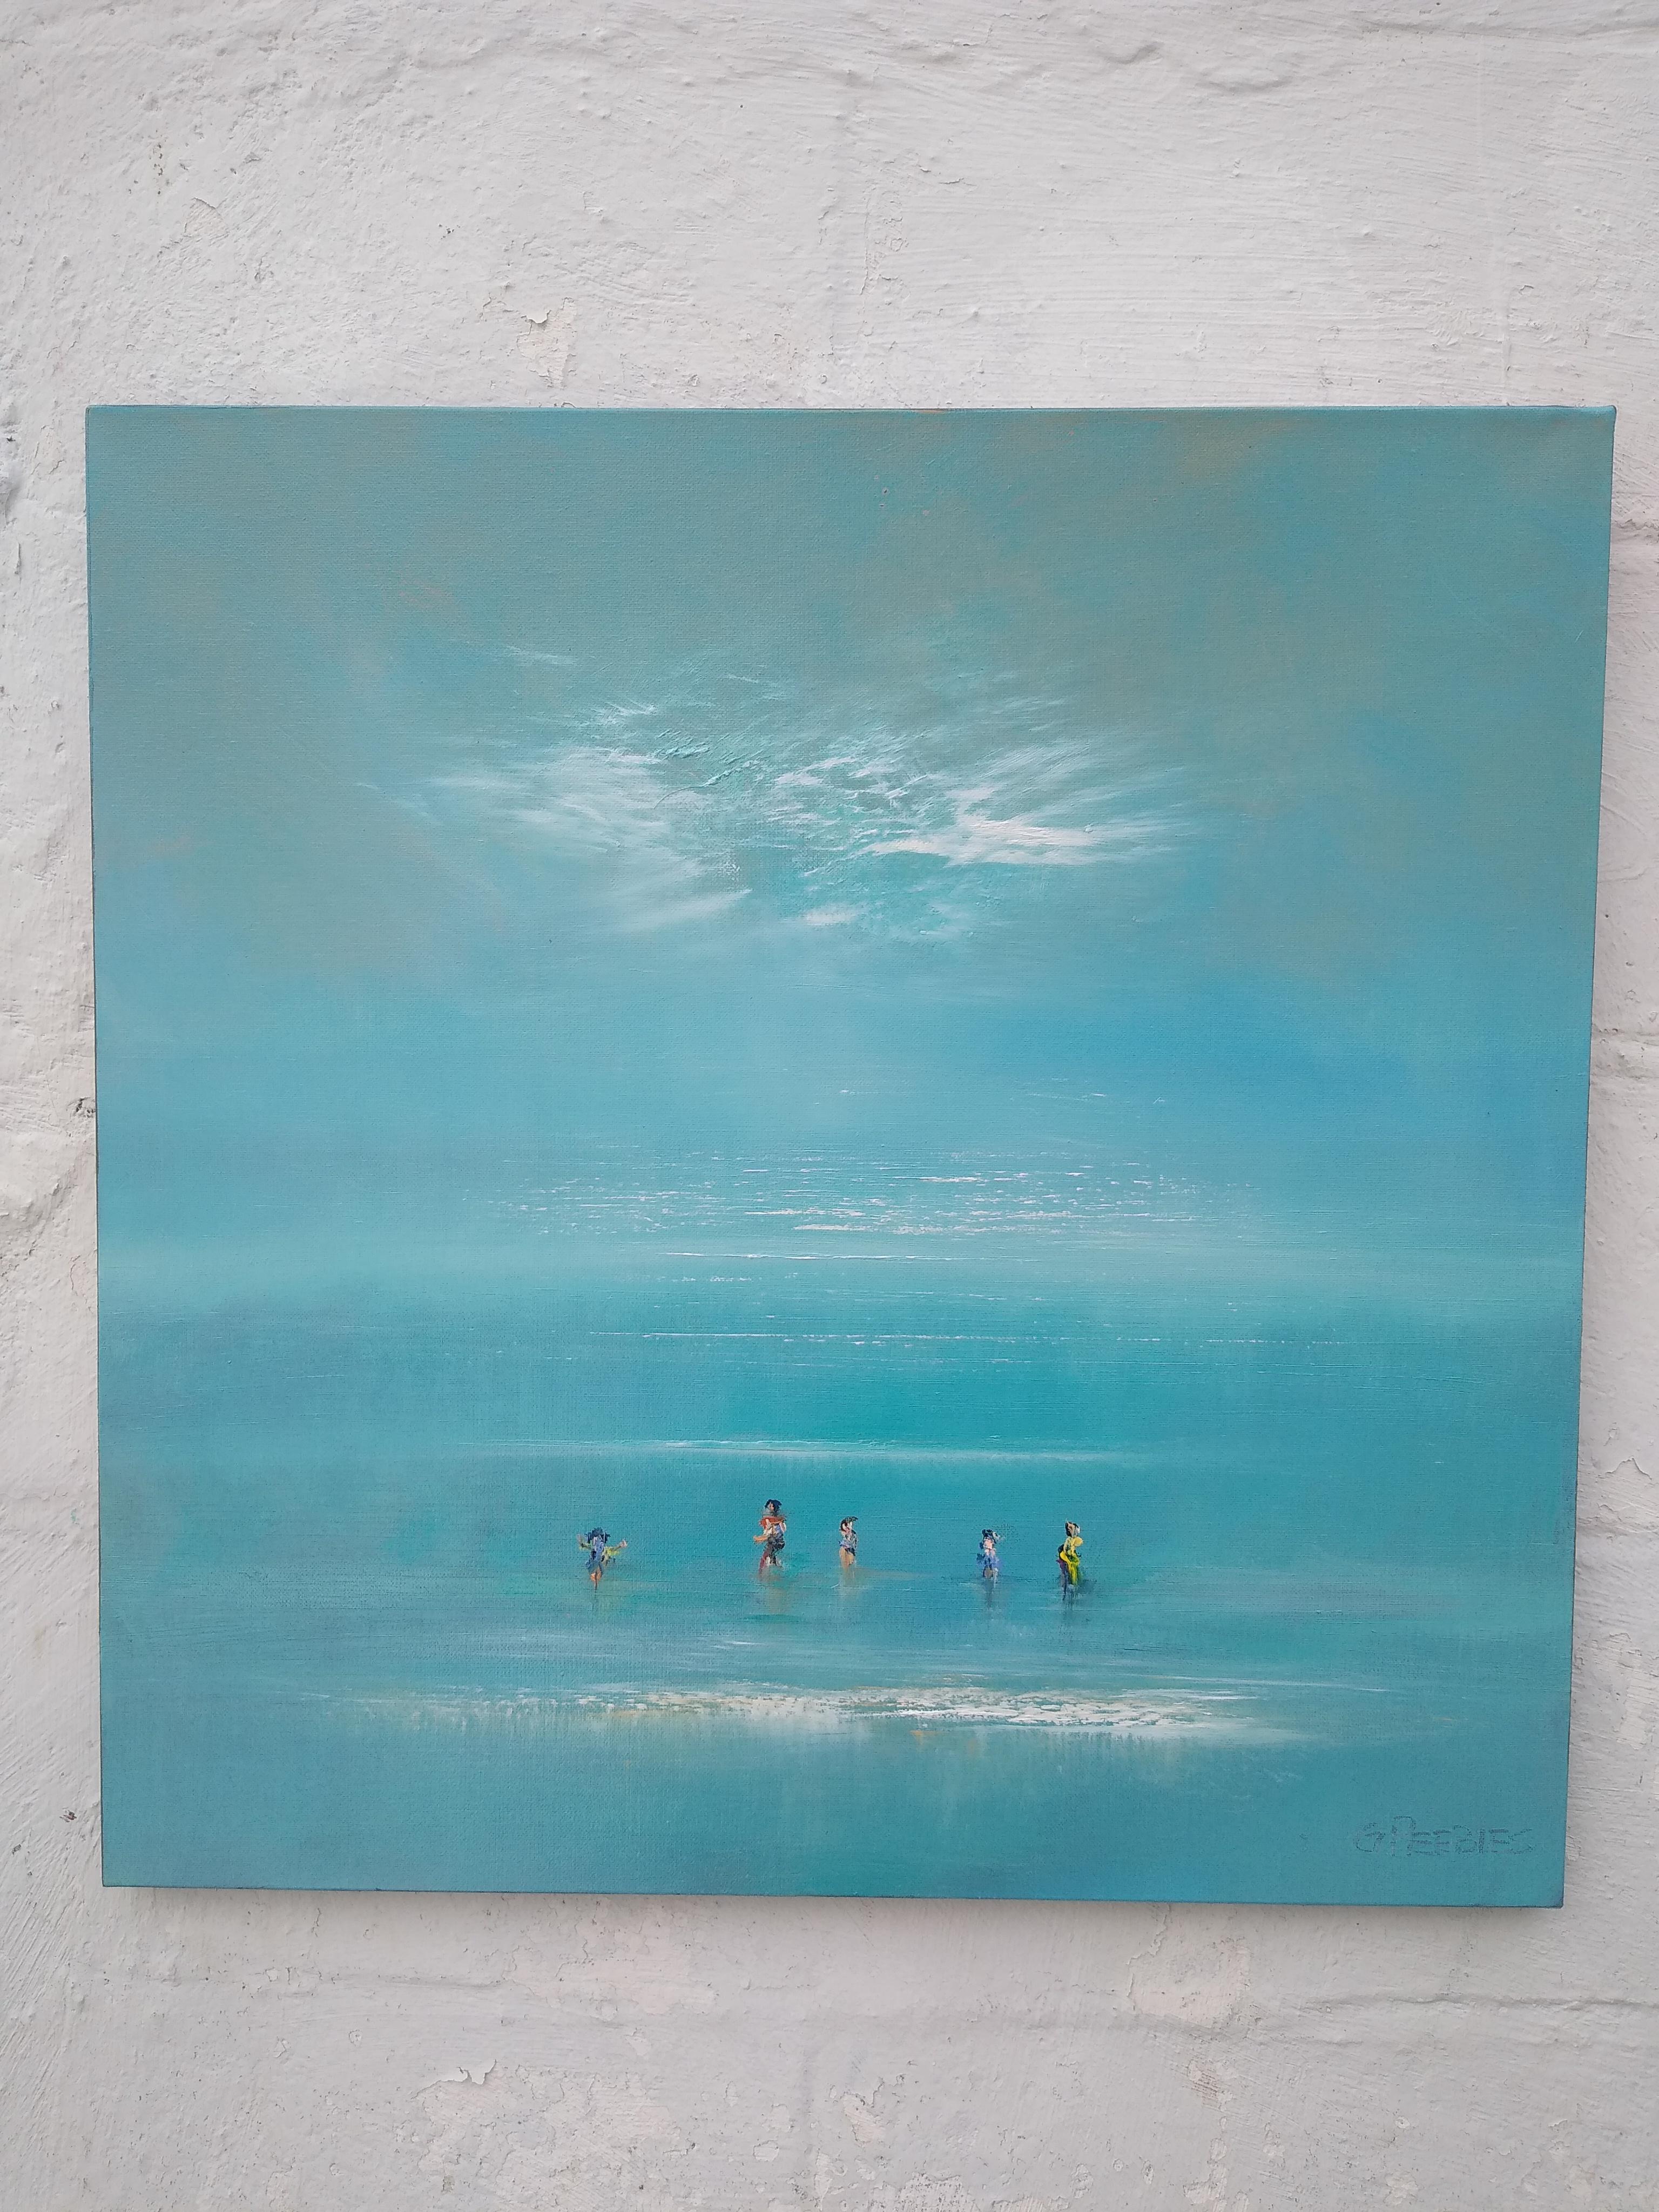 <p>Artist Comments<br>Artist George Peebles demonstrates a dreamy seascape that borders the realms of abstraction. A family of five swims on a foggy day at the beach. George depicts the figures at a far distance in gestural strokes with minimal